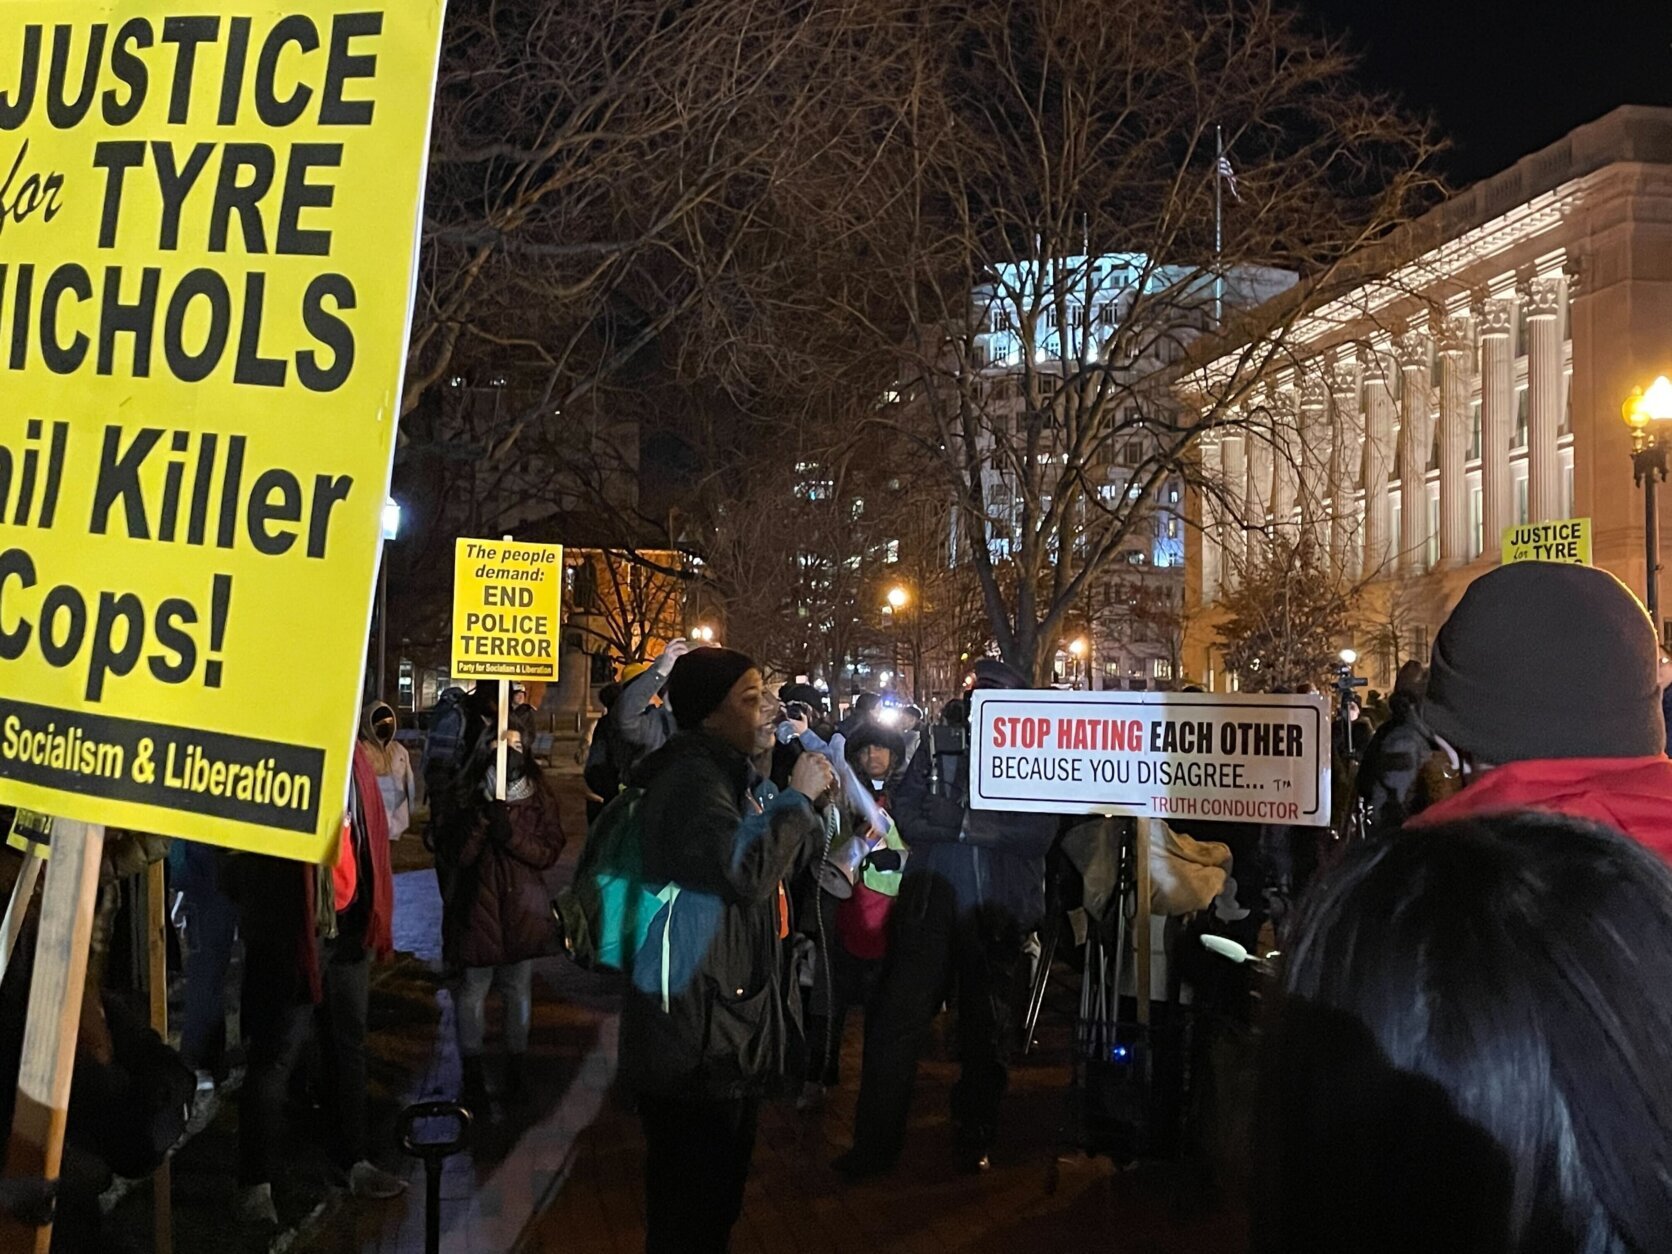 A Party for Socialism and Liberation protester giving a speech in downtown D.C. surrounded by people holding signs that read "Stop Hating Each Other Because You Disagree …" and "The people demand: End Police Terror."